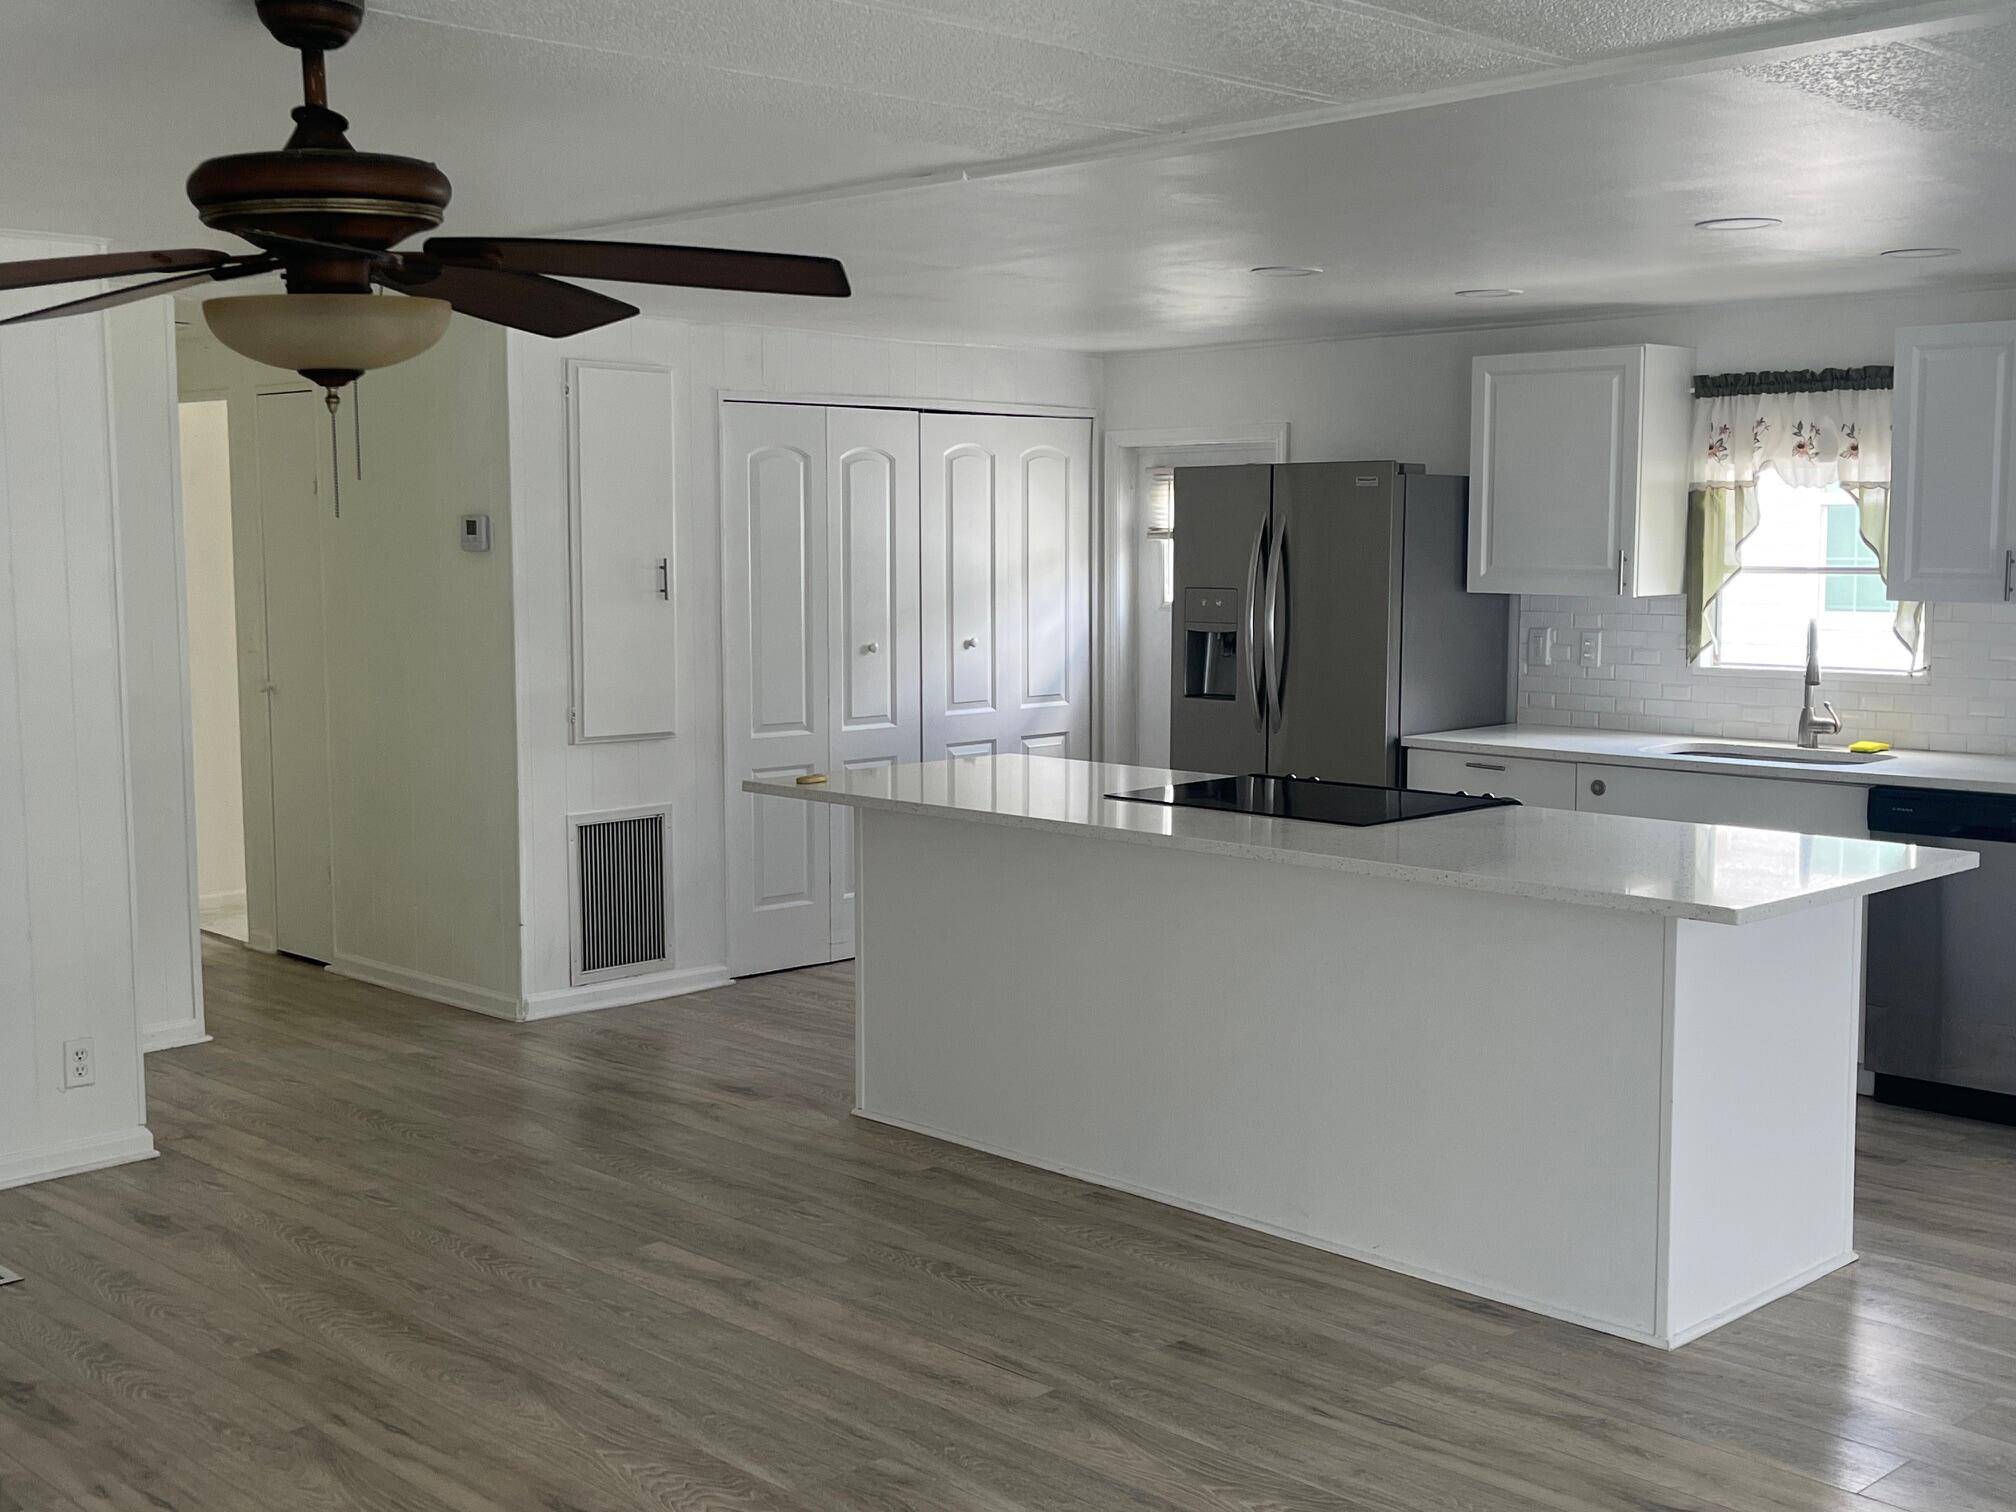 Welcome to this inviting 2 bedroom residence featuring a spacious open floor plan, complete with quartz countertops and elegant white shaker cabinets in the kitchen, complemented by stainless steel appliances.